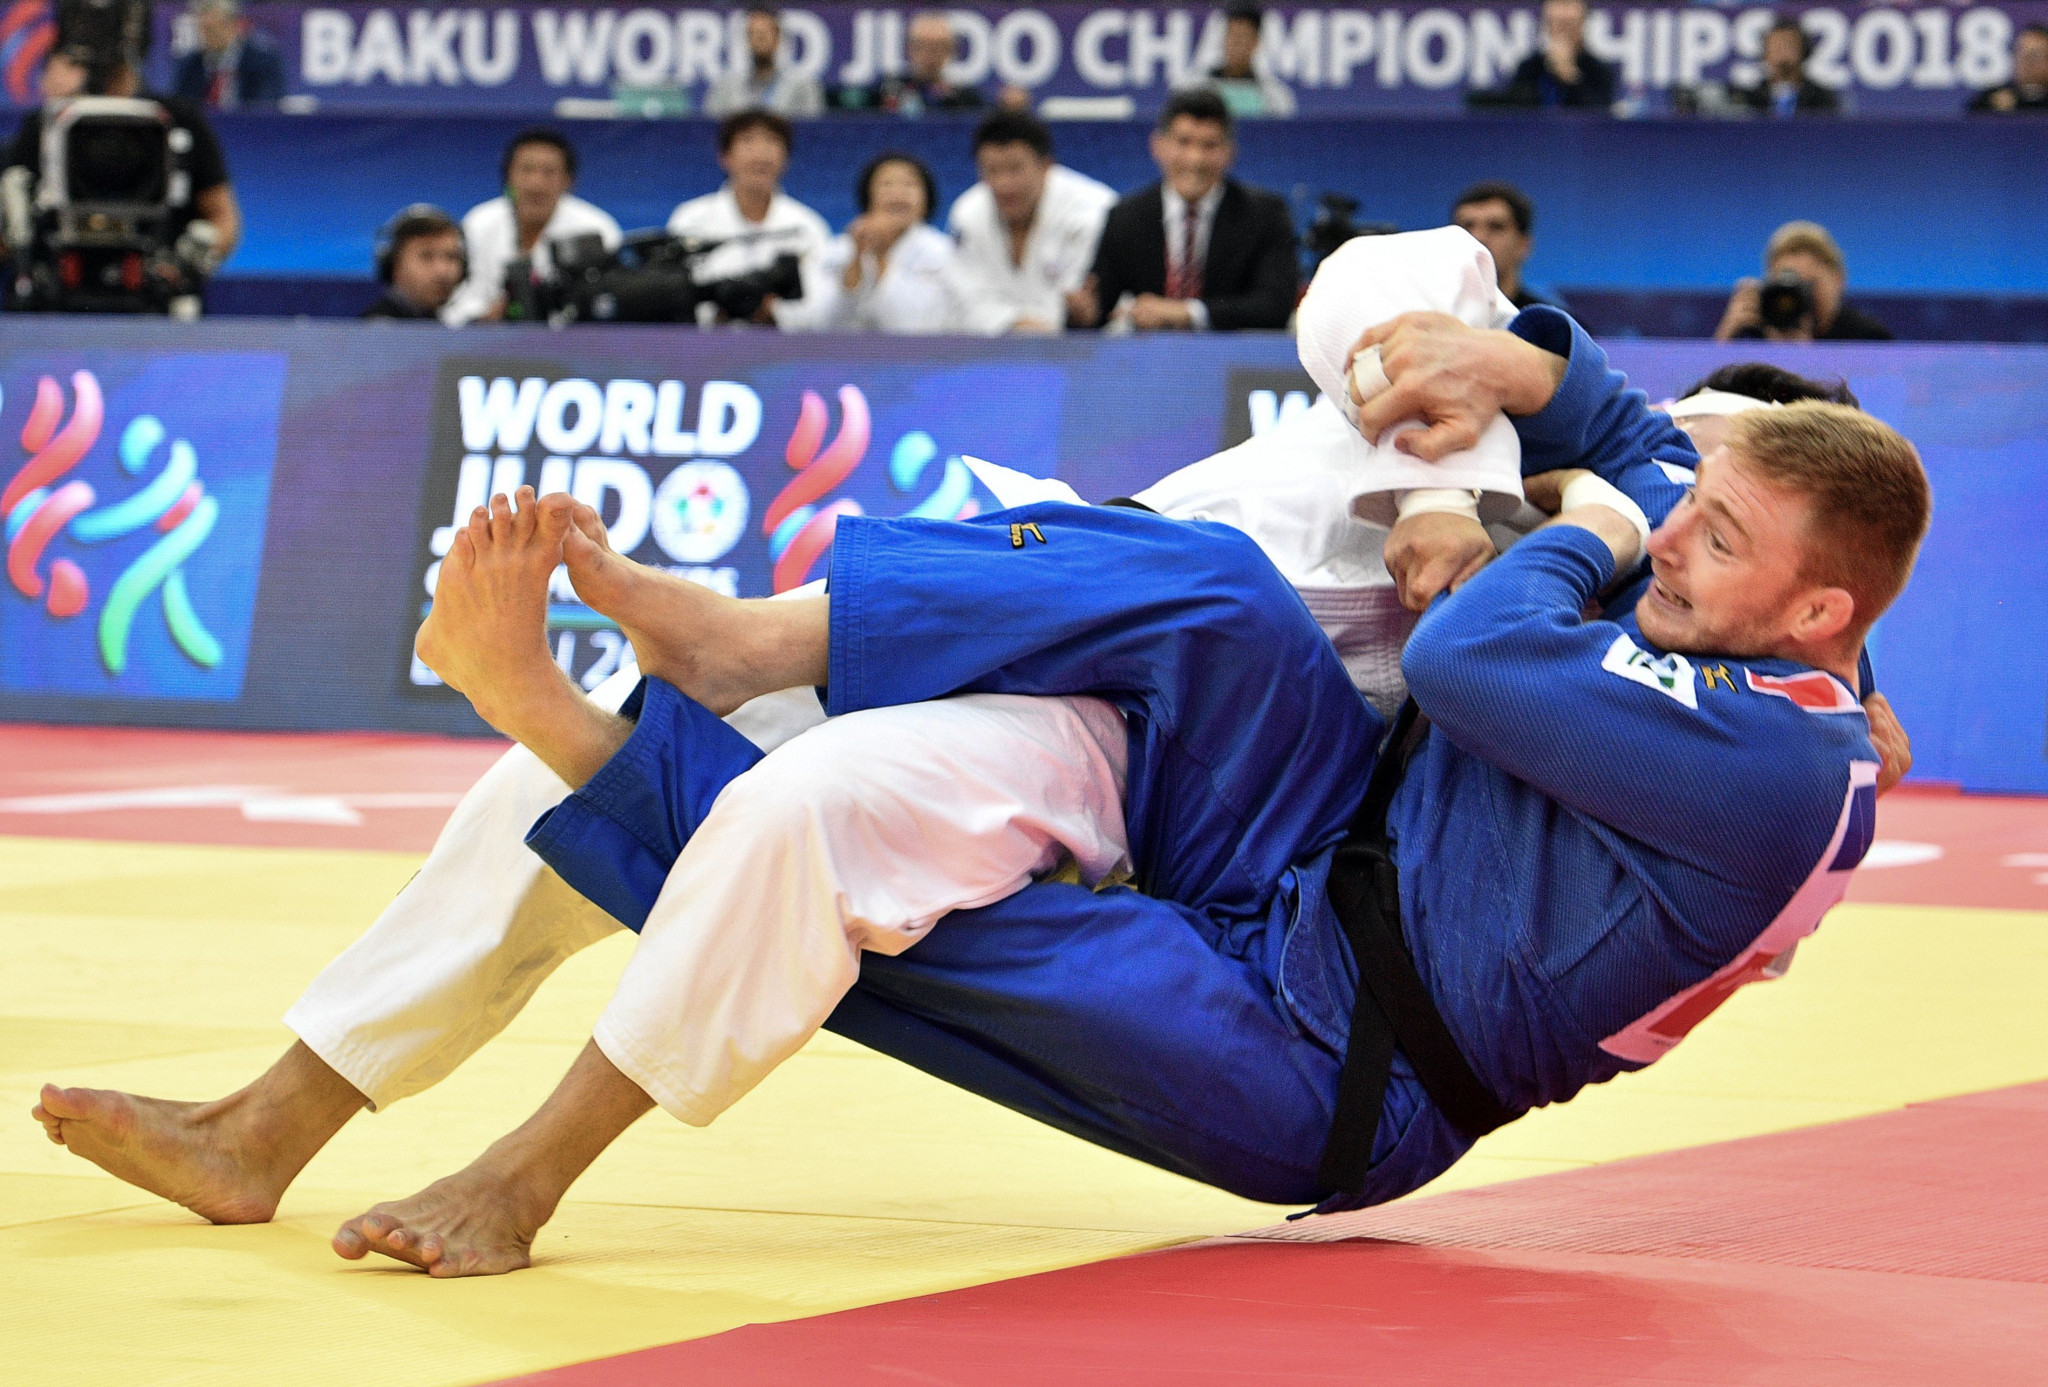 JudoWorld2018: Top 5 Pictures around the tatami /